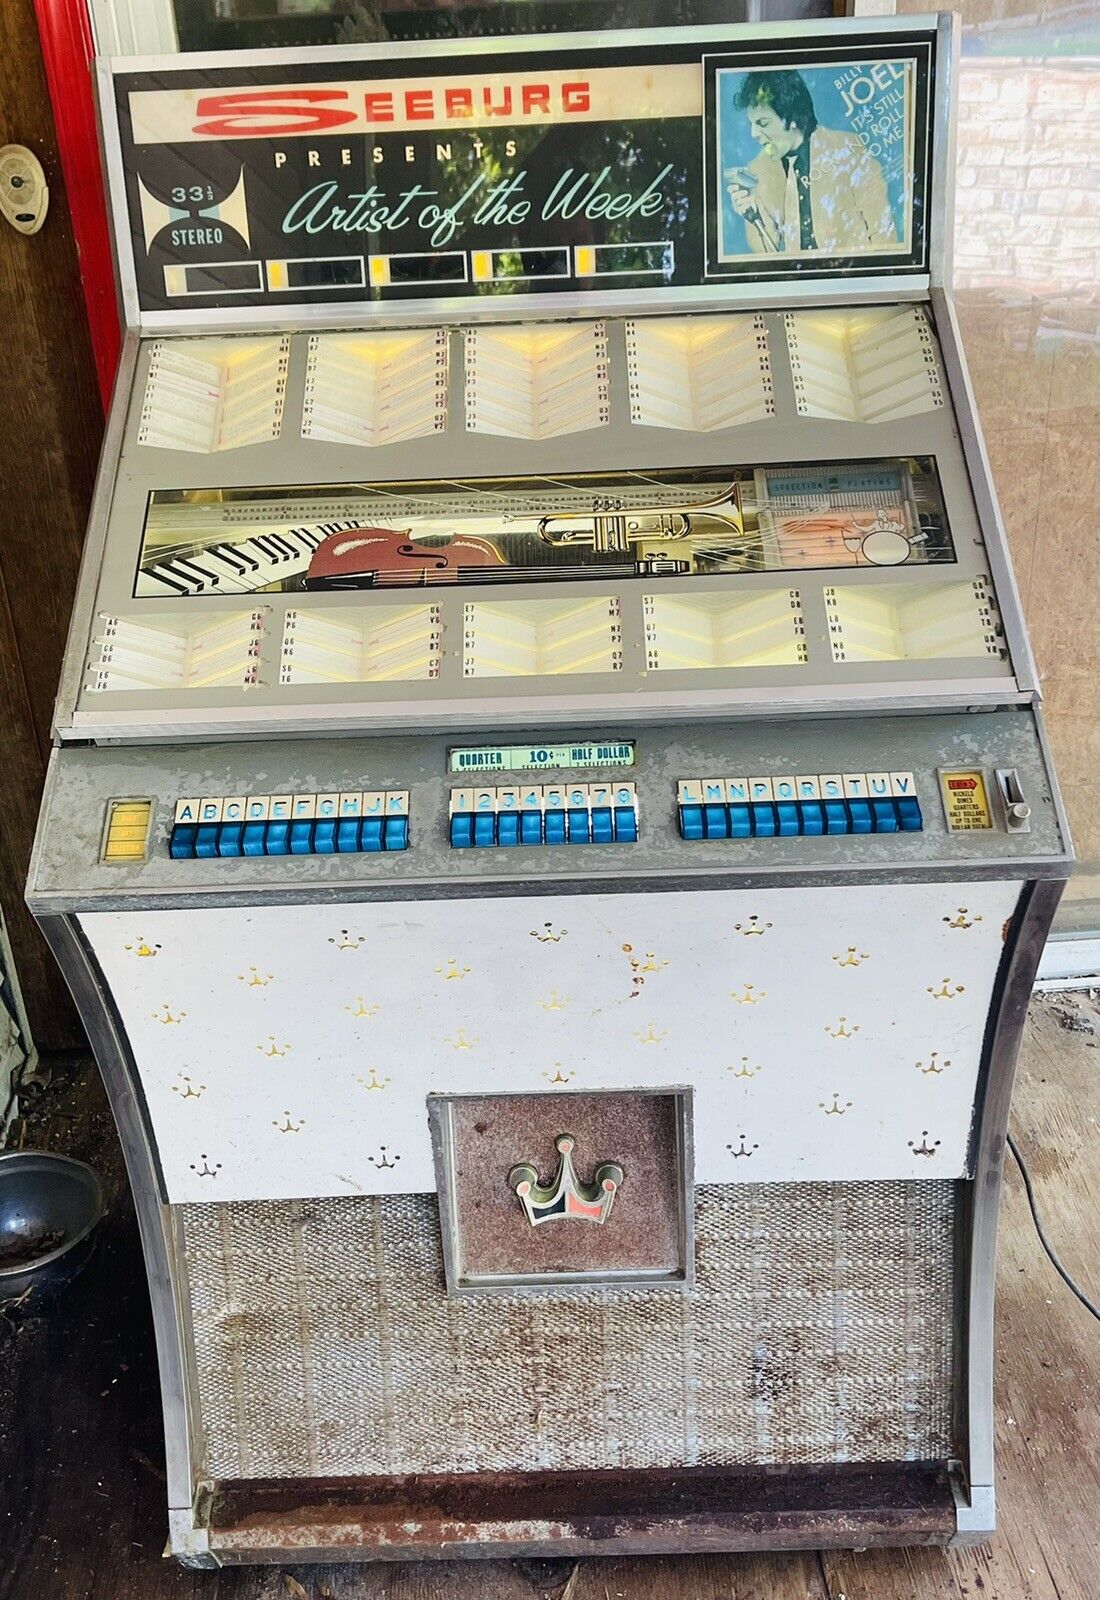 SEEBURG SELECT-O-MATIC 160 SELECTION ARTIST OF THE WEEK JUKEBOX MODEL DS 160 H